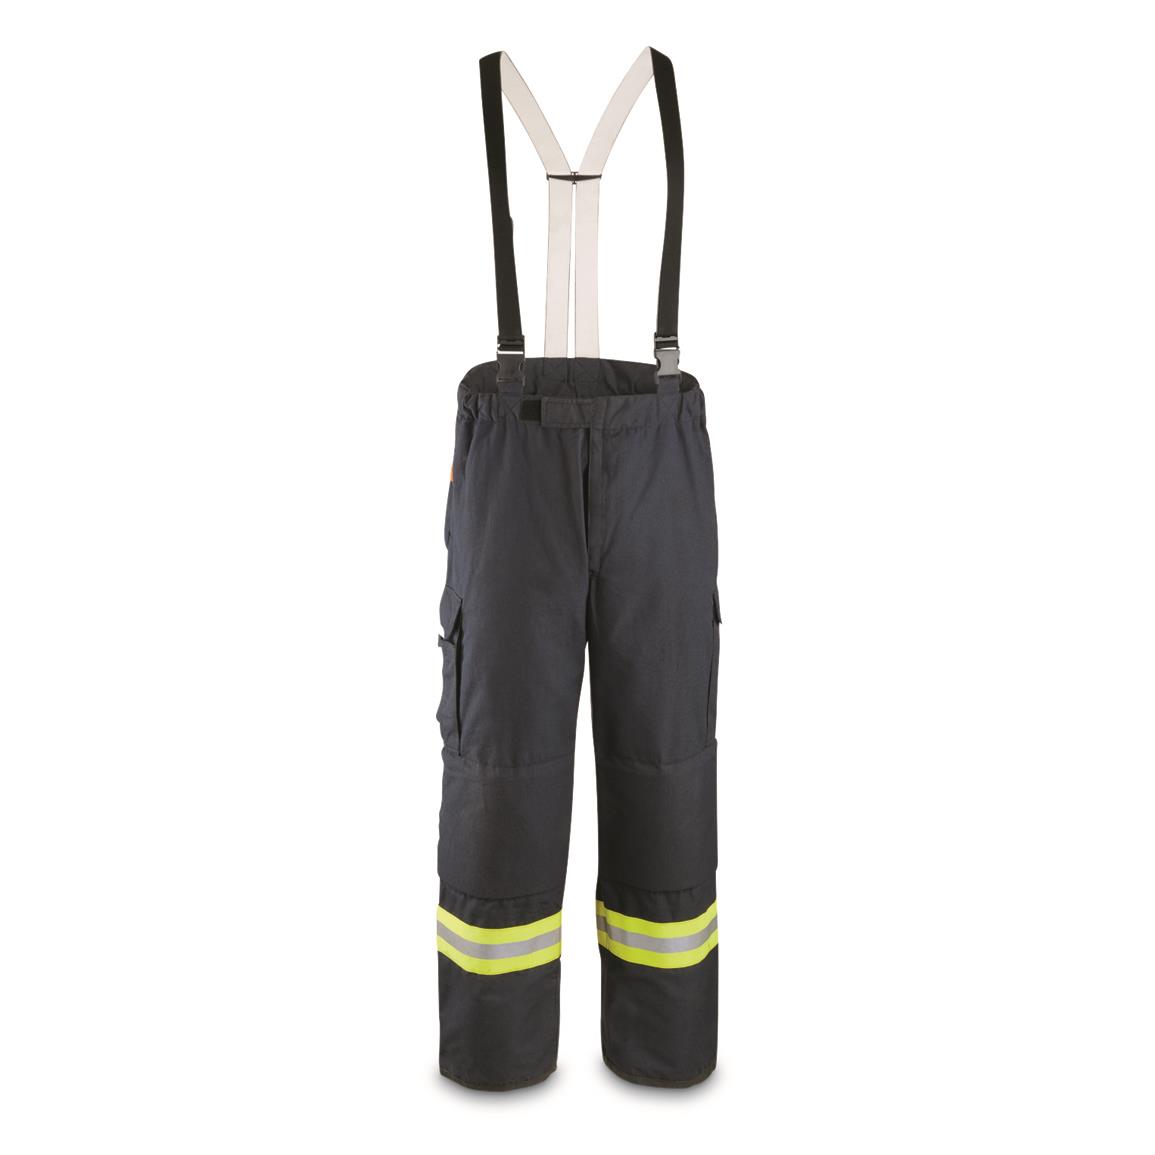 German Fire Service Surplus Overpants with GORE-TEX, Used, Black